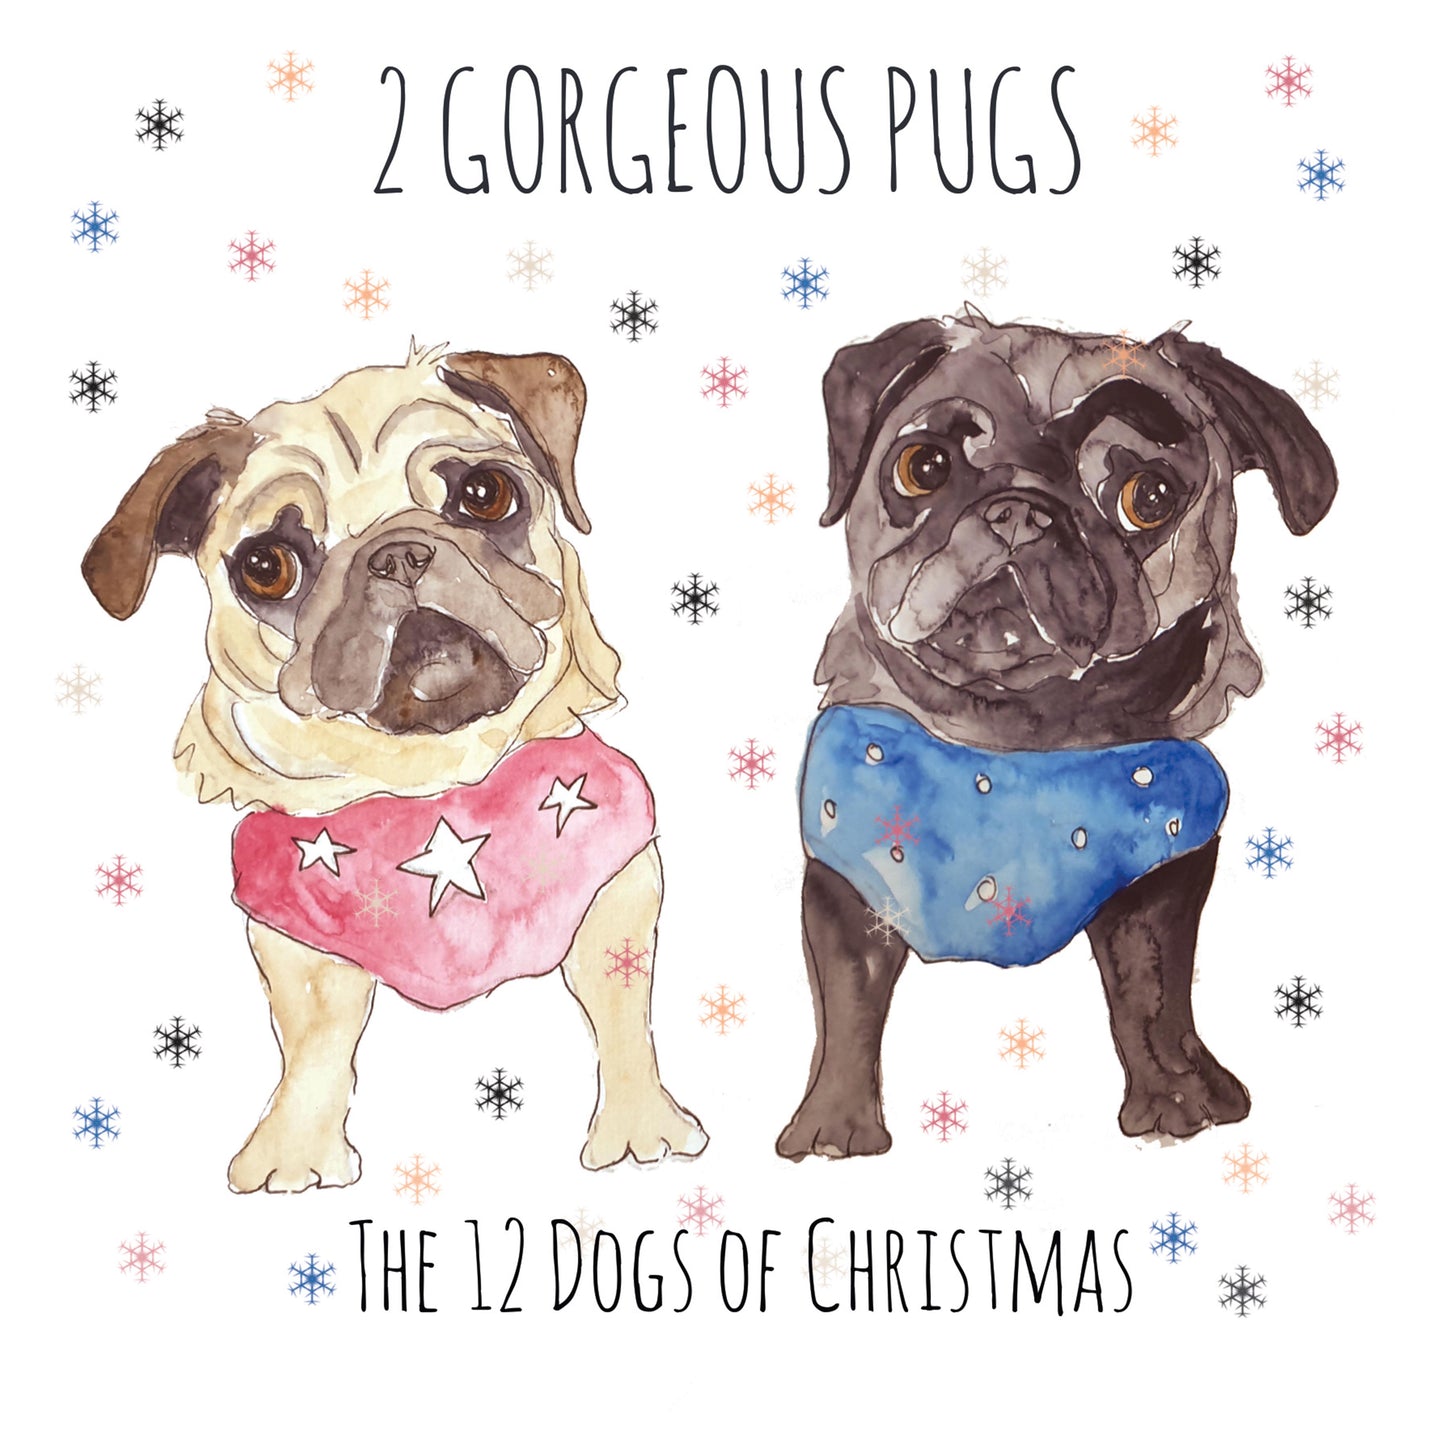 Load image into Gallery viewer, 2 Gorgeous Pugs - Greeting Card
